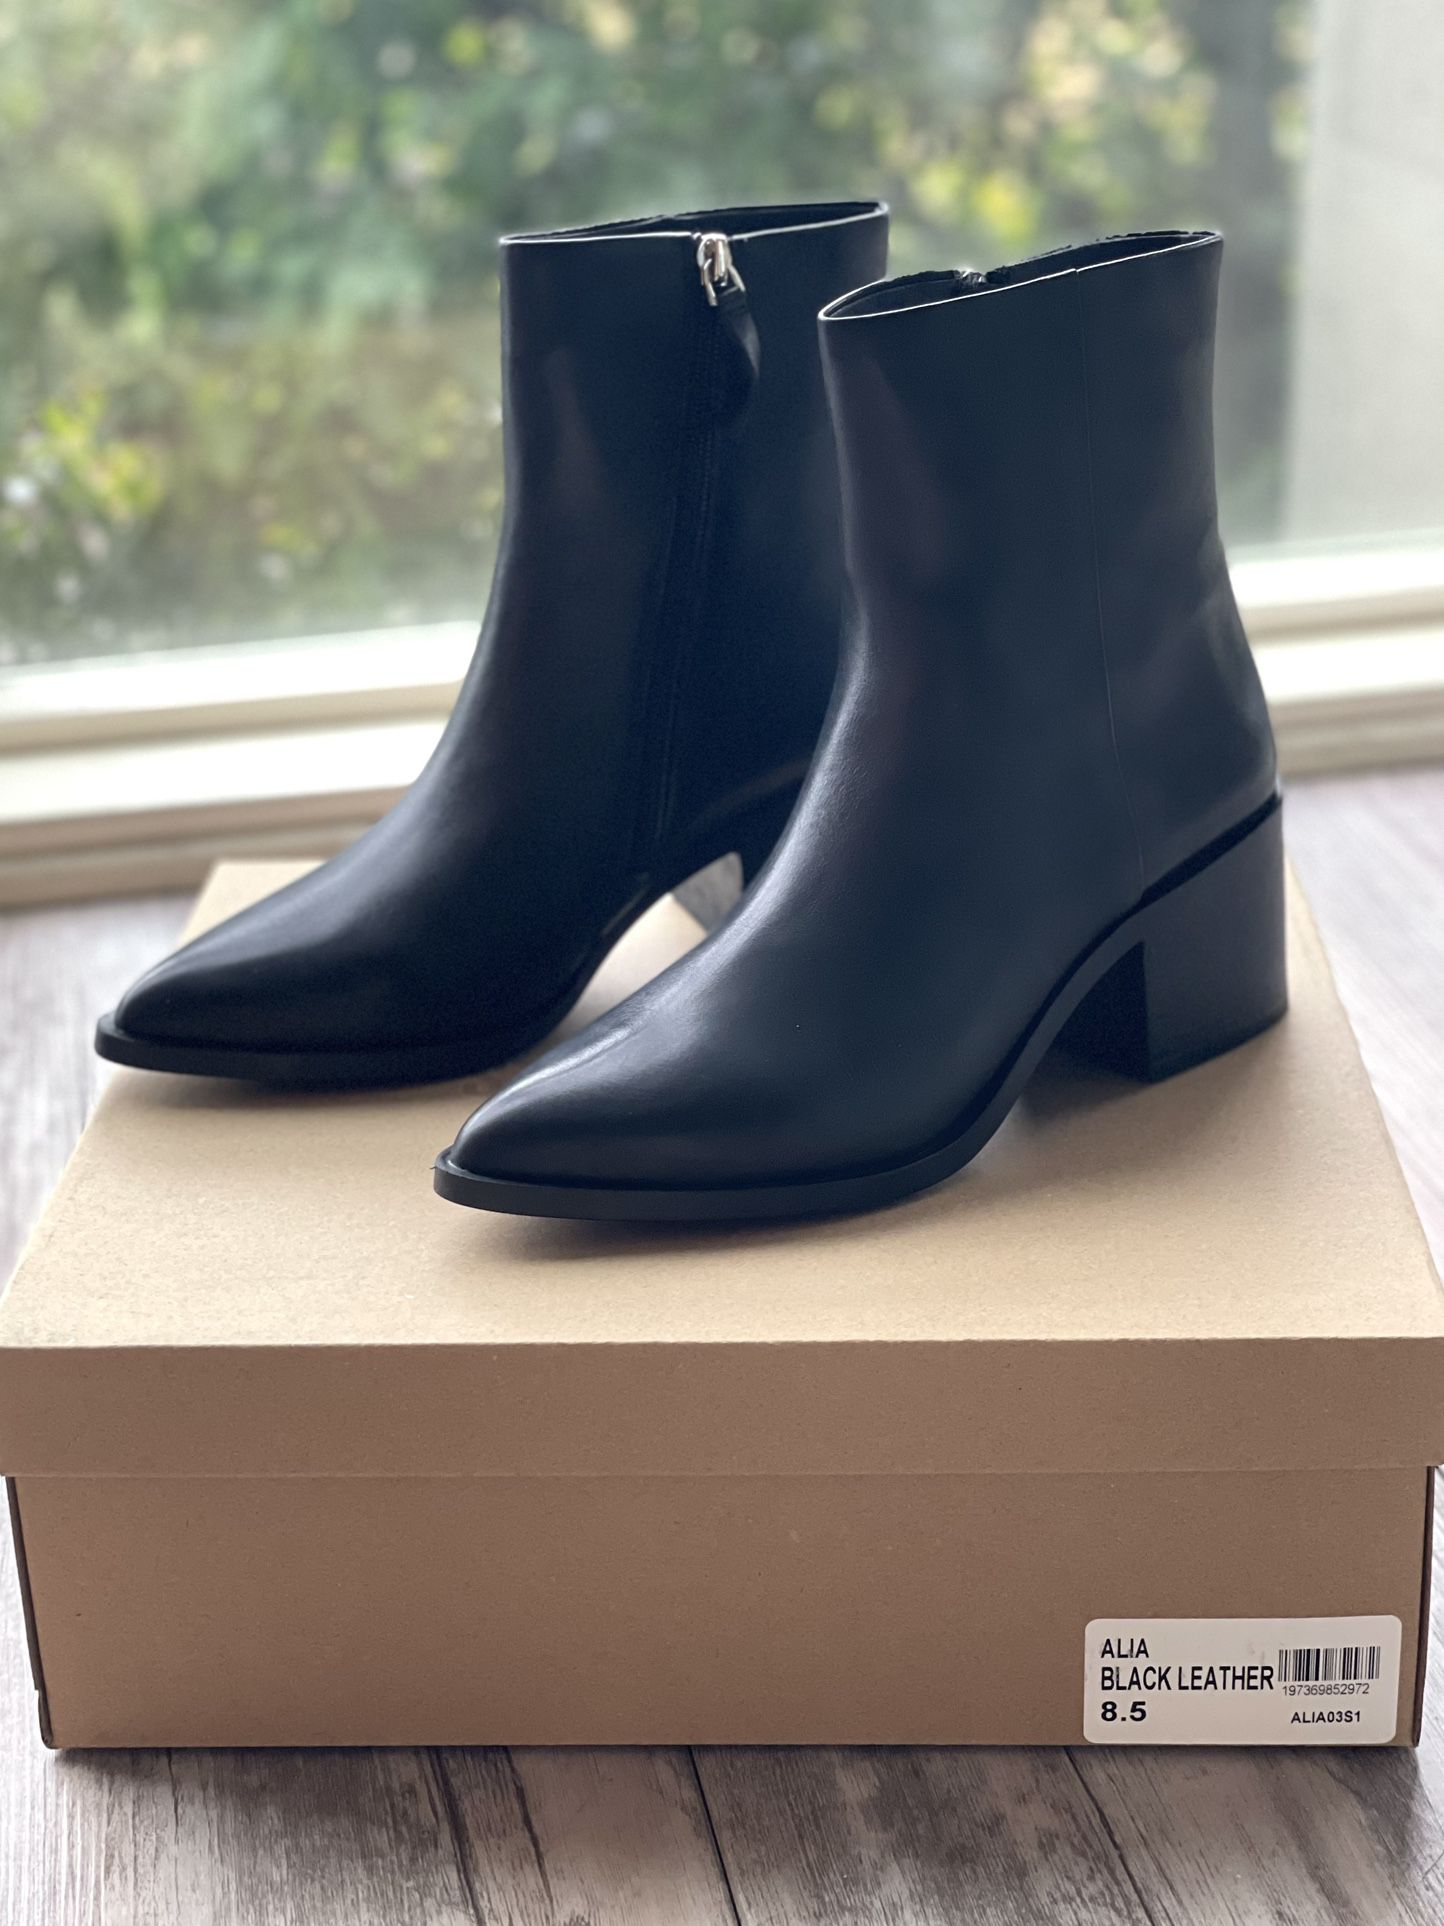 Steve Madden Black Leather Booties Size 8.5